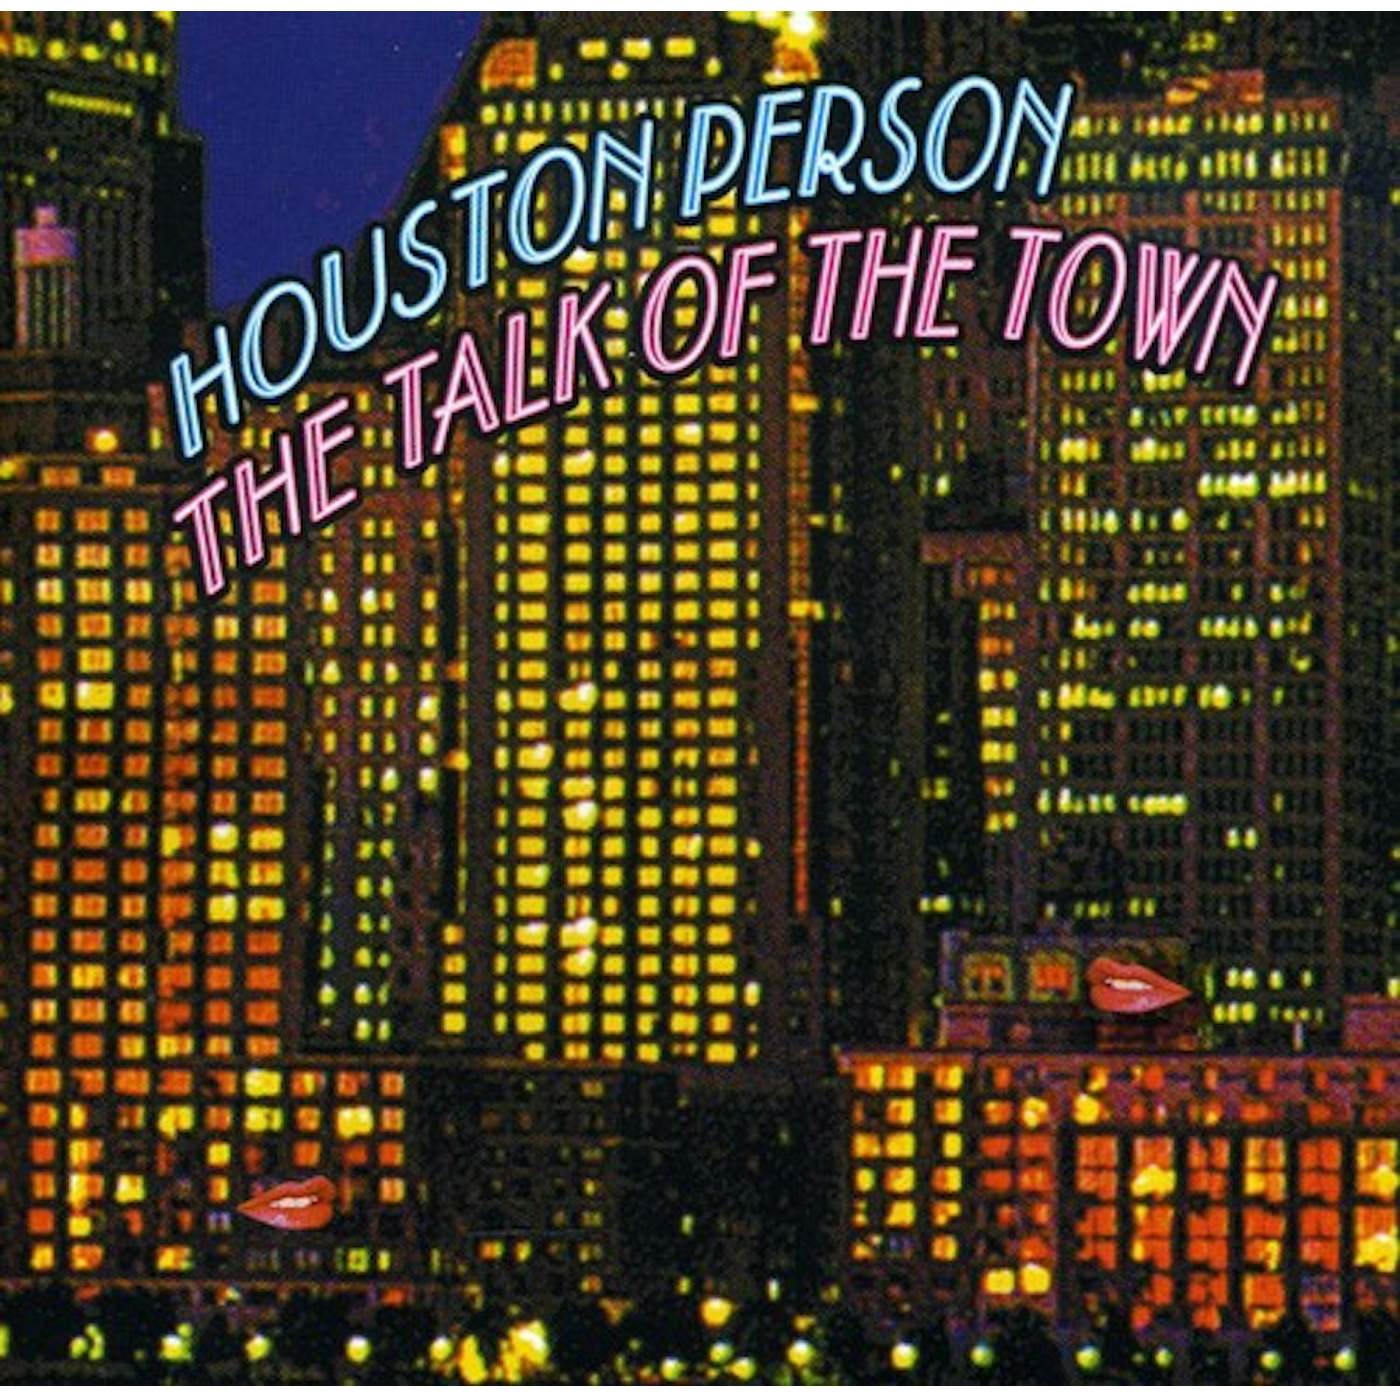 Houston Person TALK OF THE TOWN CD